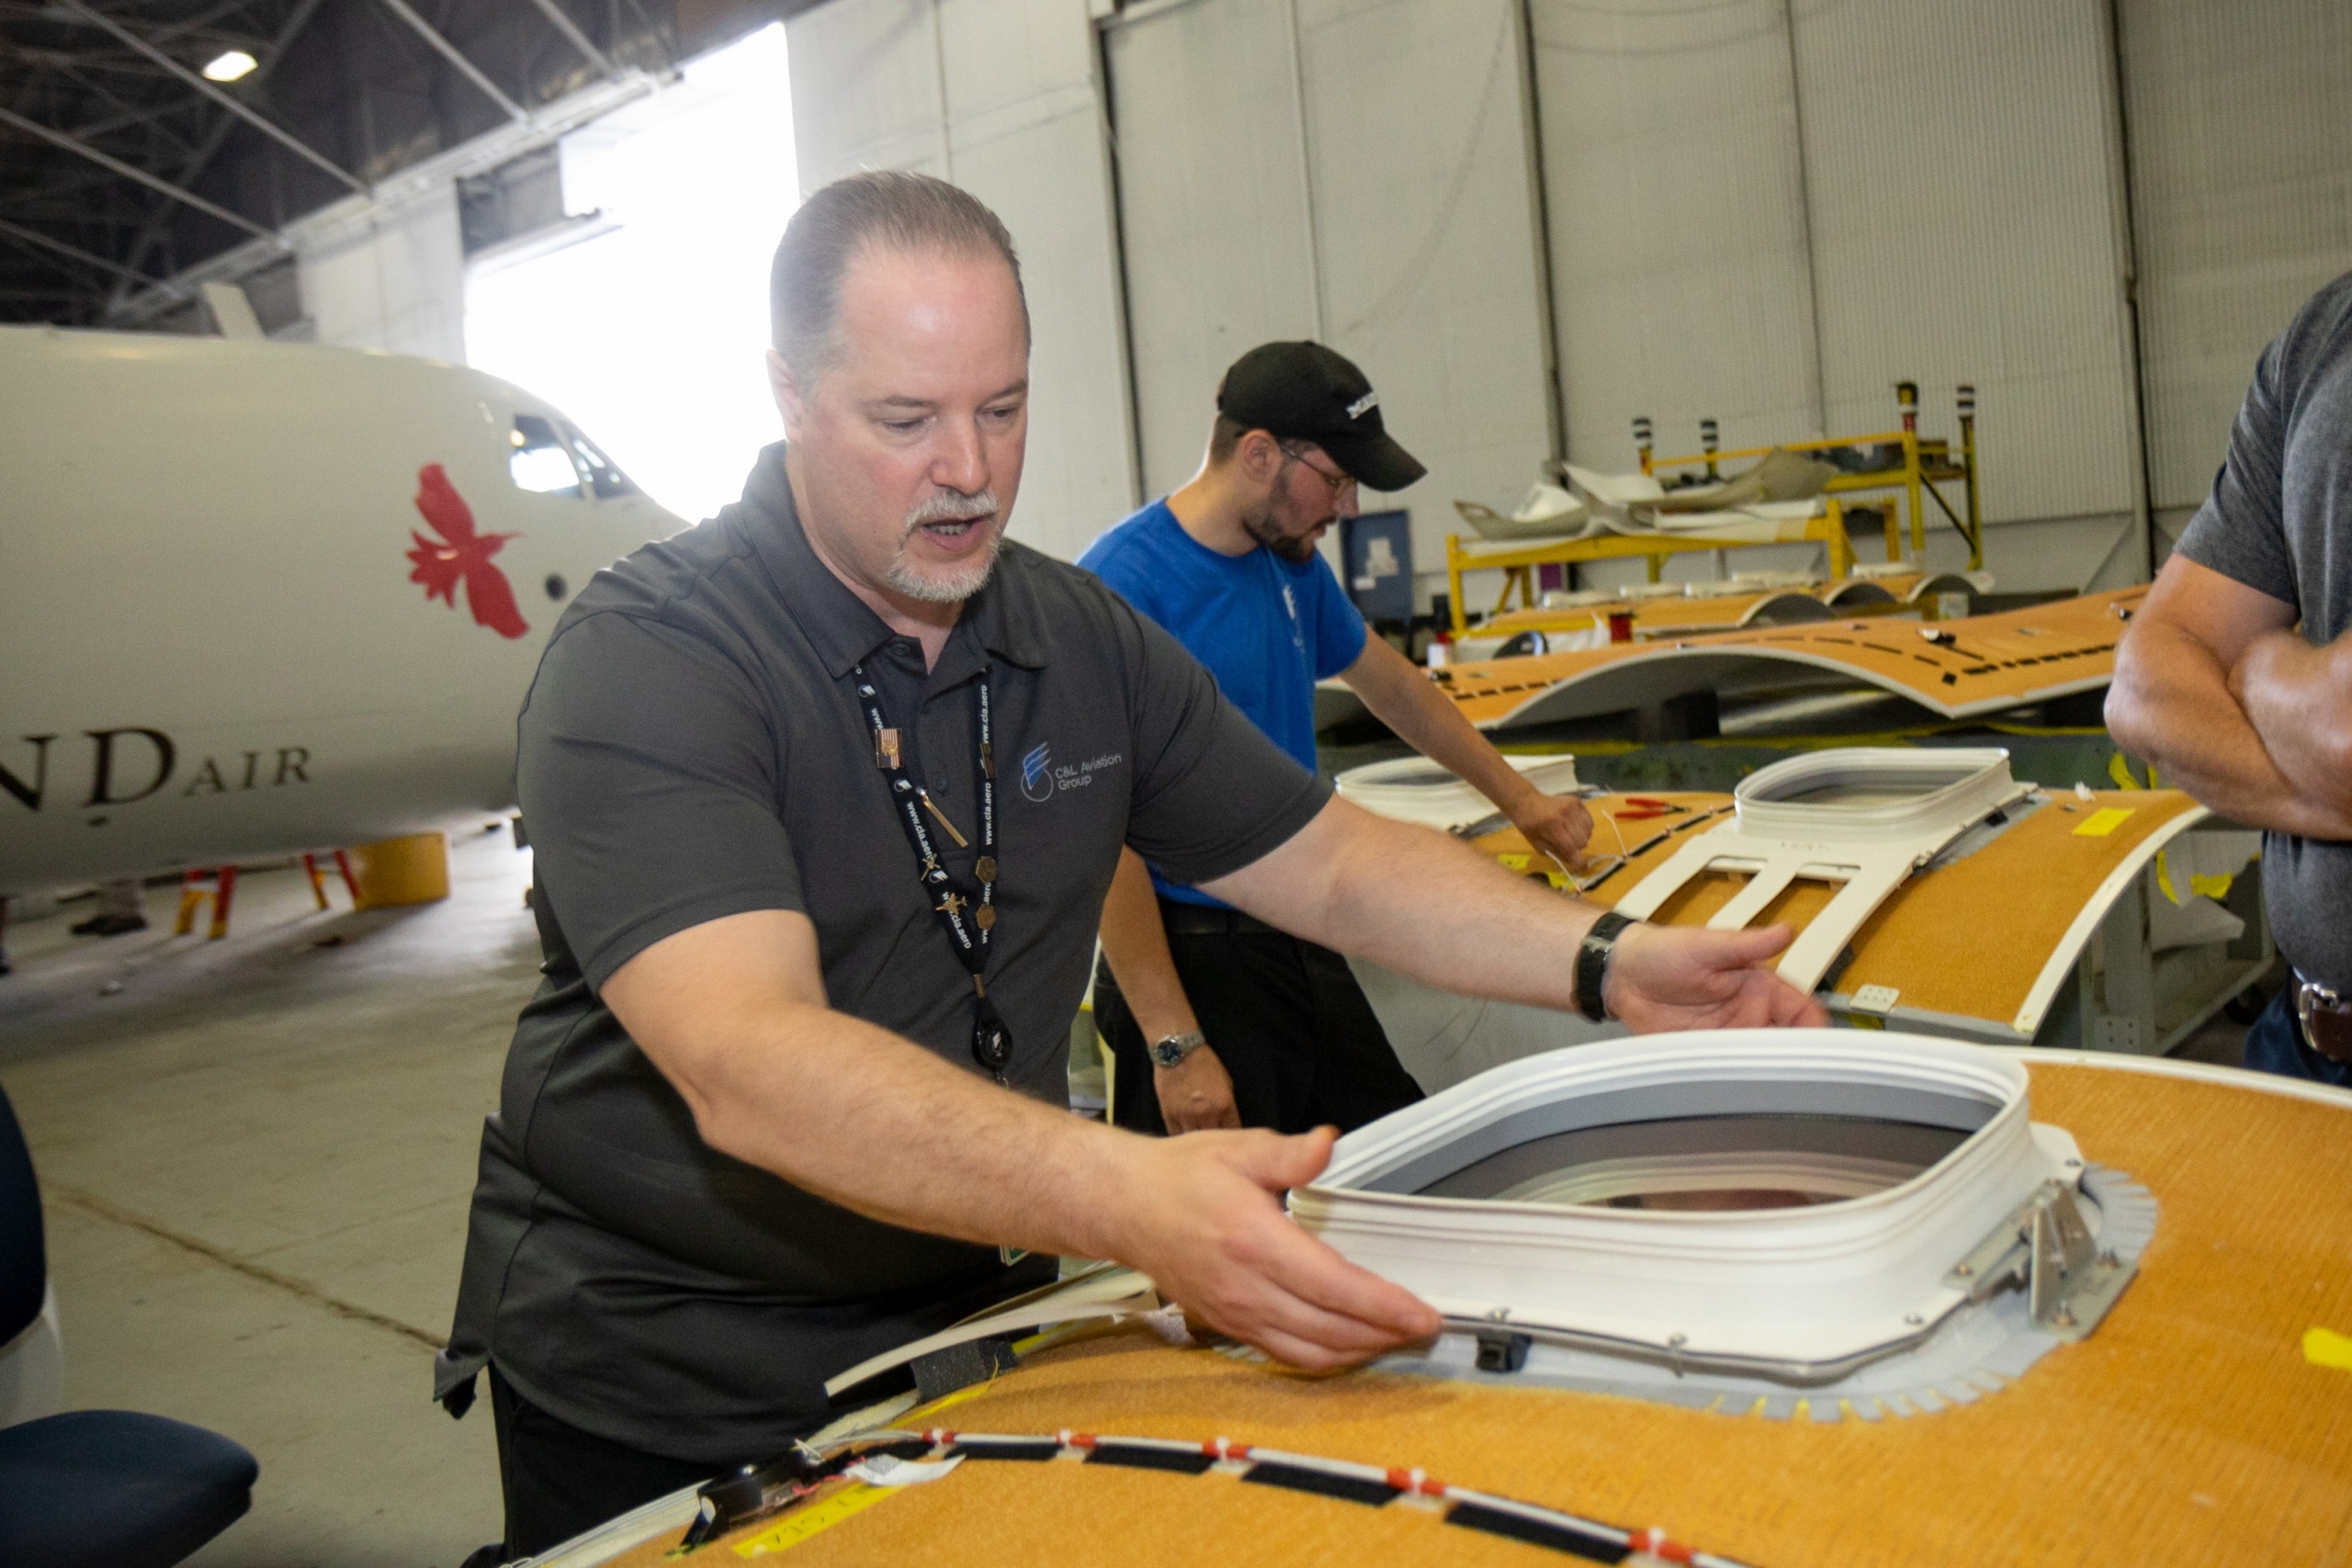 Interior regional aircraft conversion on Embraer aircraft - photo of workers assembling ceiling parts of an aircraft